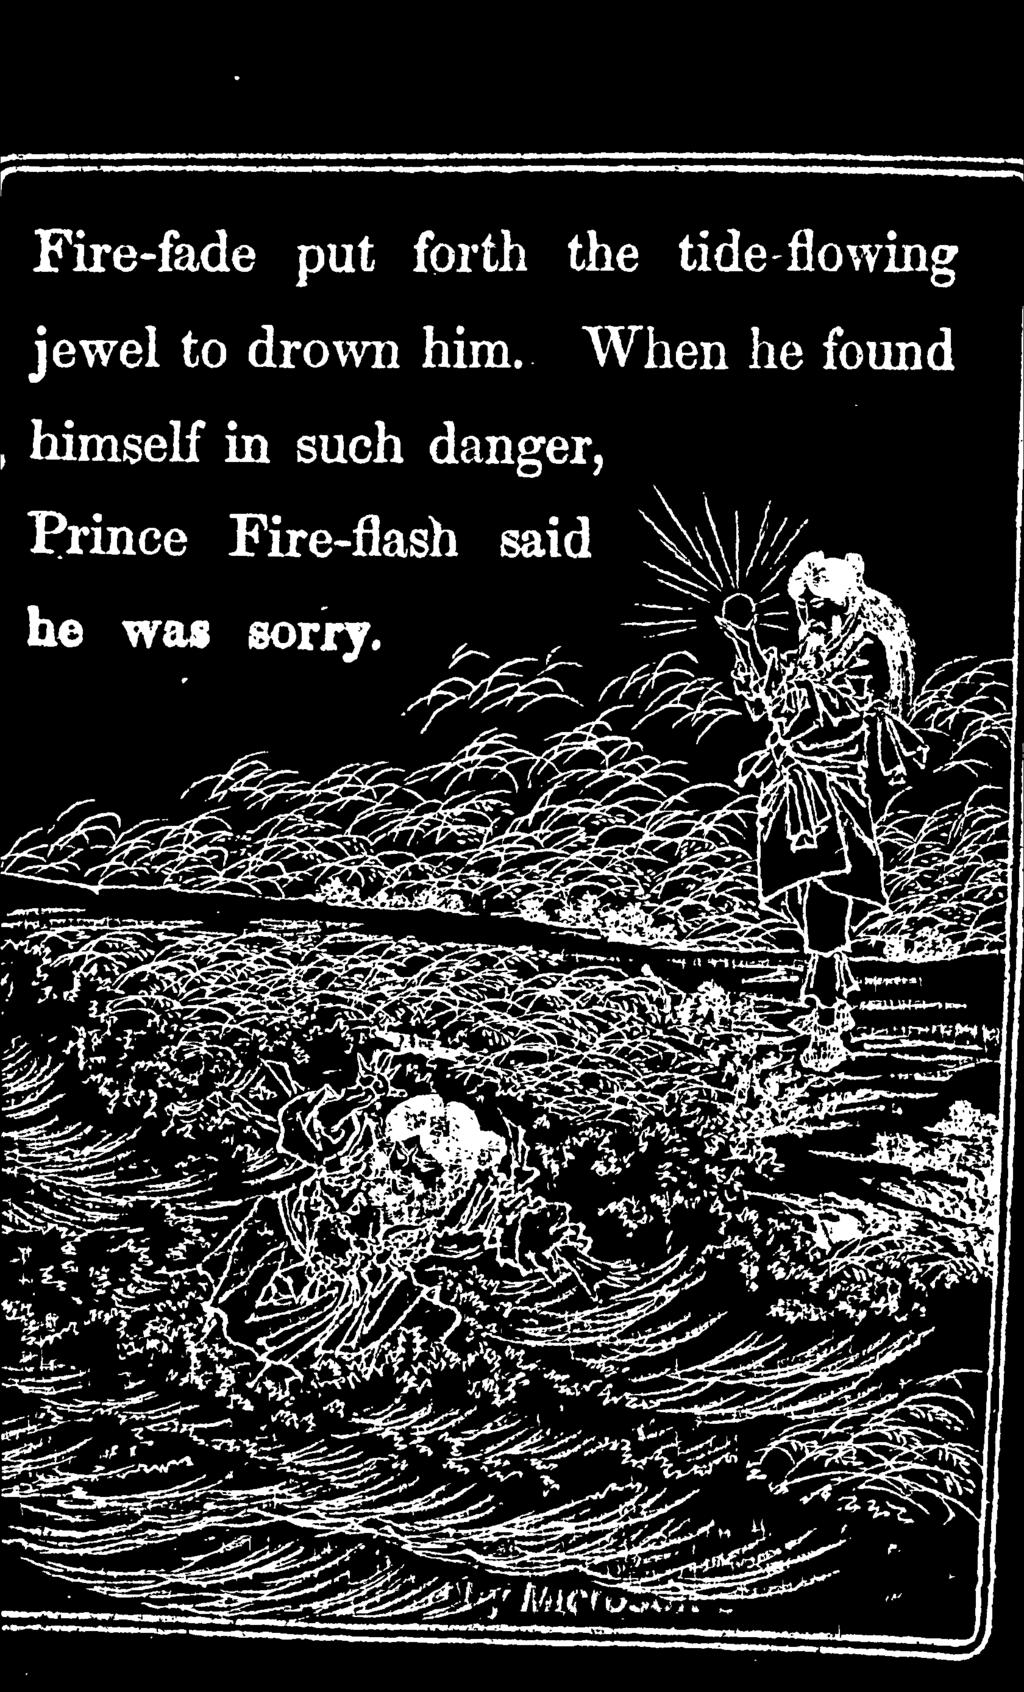 in such danger, Prince